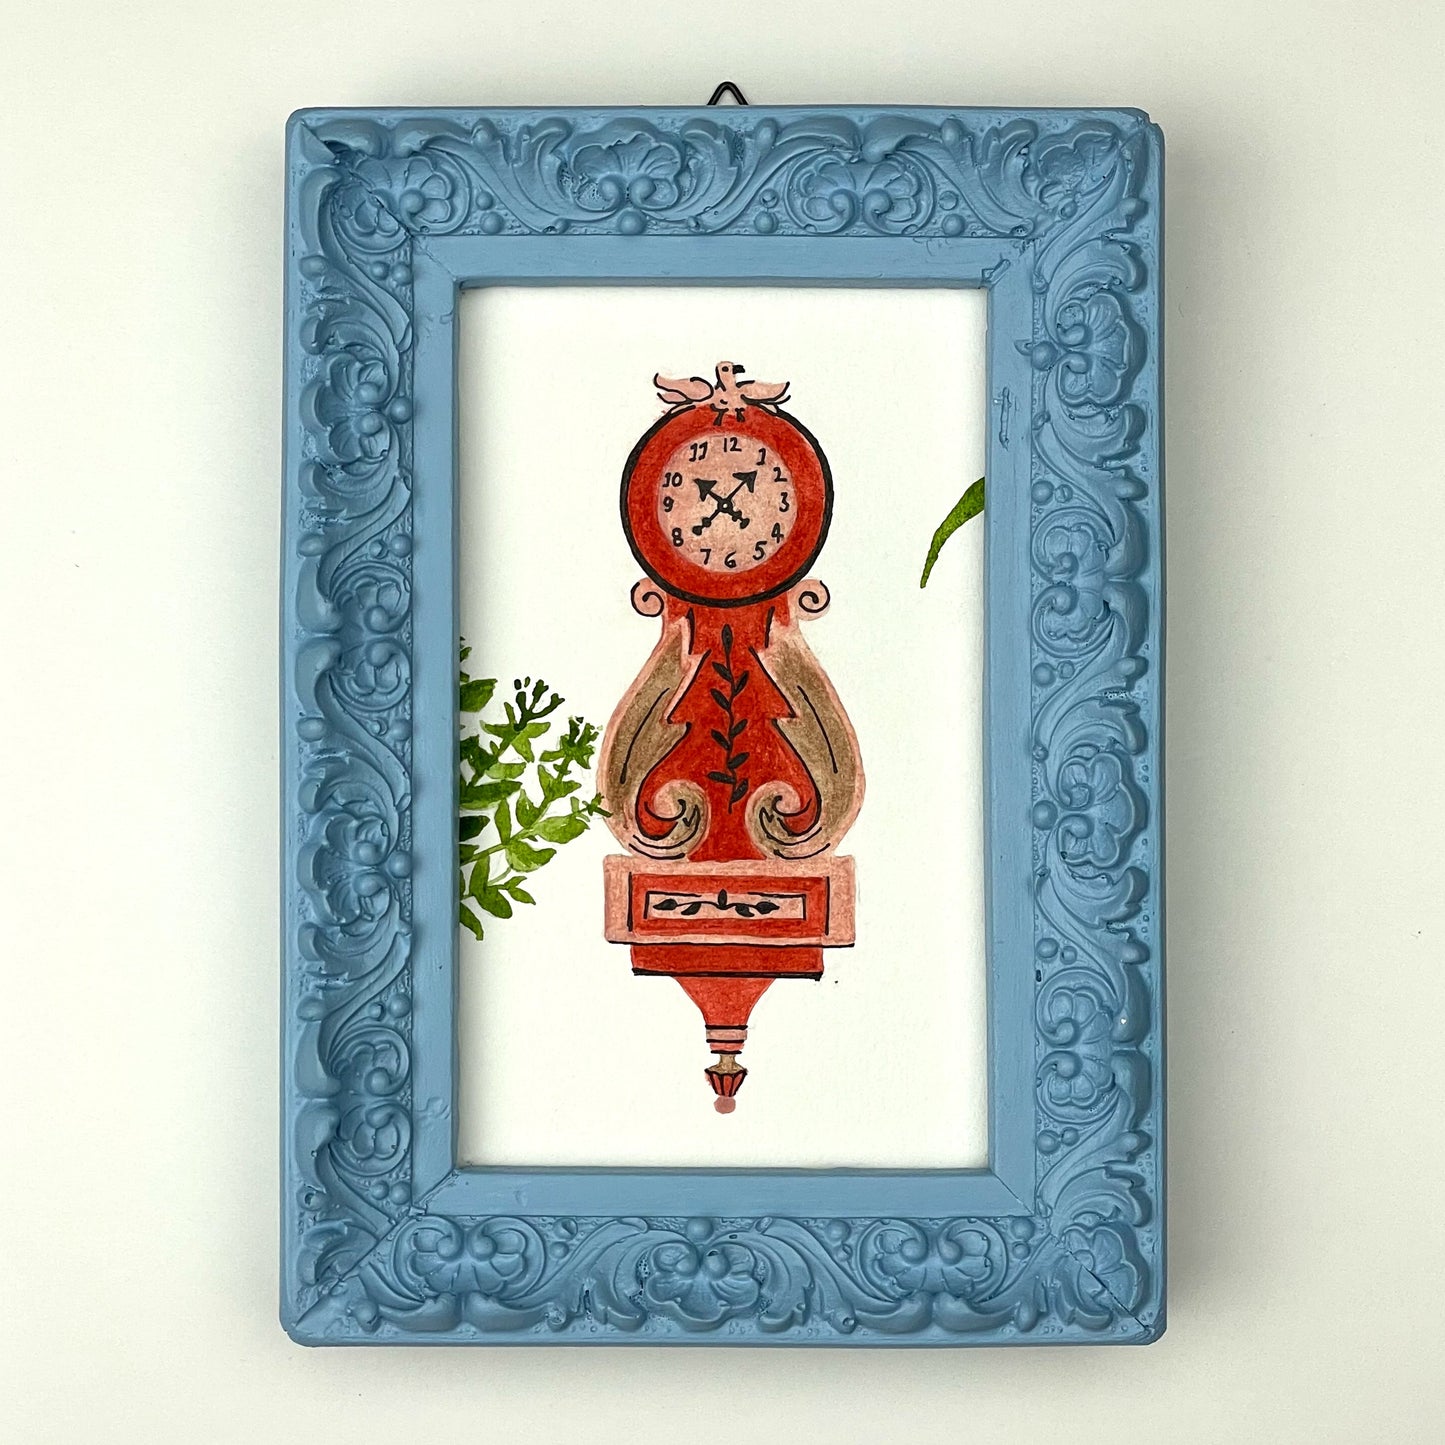 "OLD CLOCK" 5/8 INTO THE KITCHEN SERIES